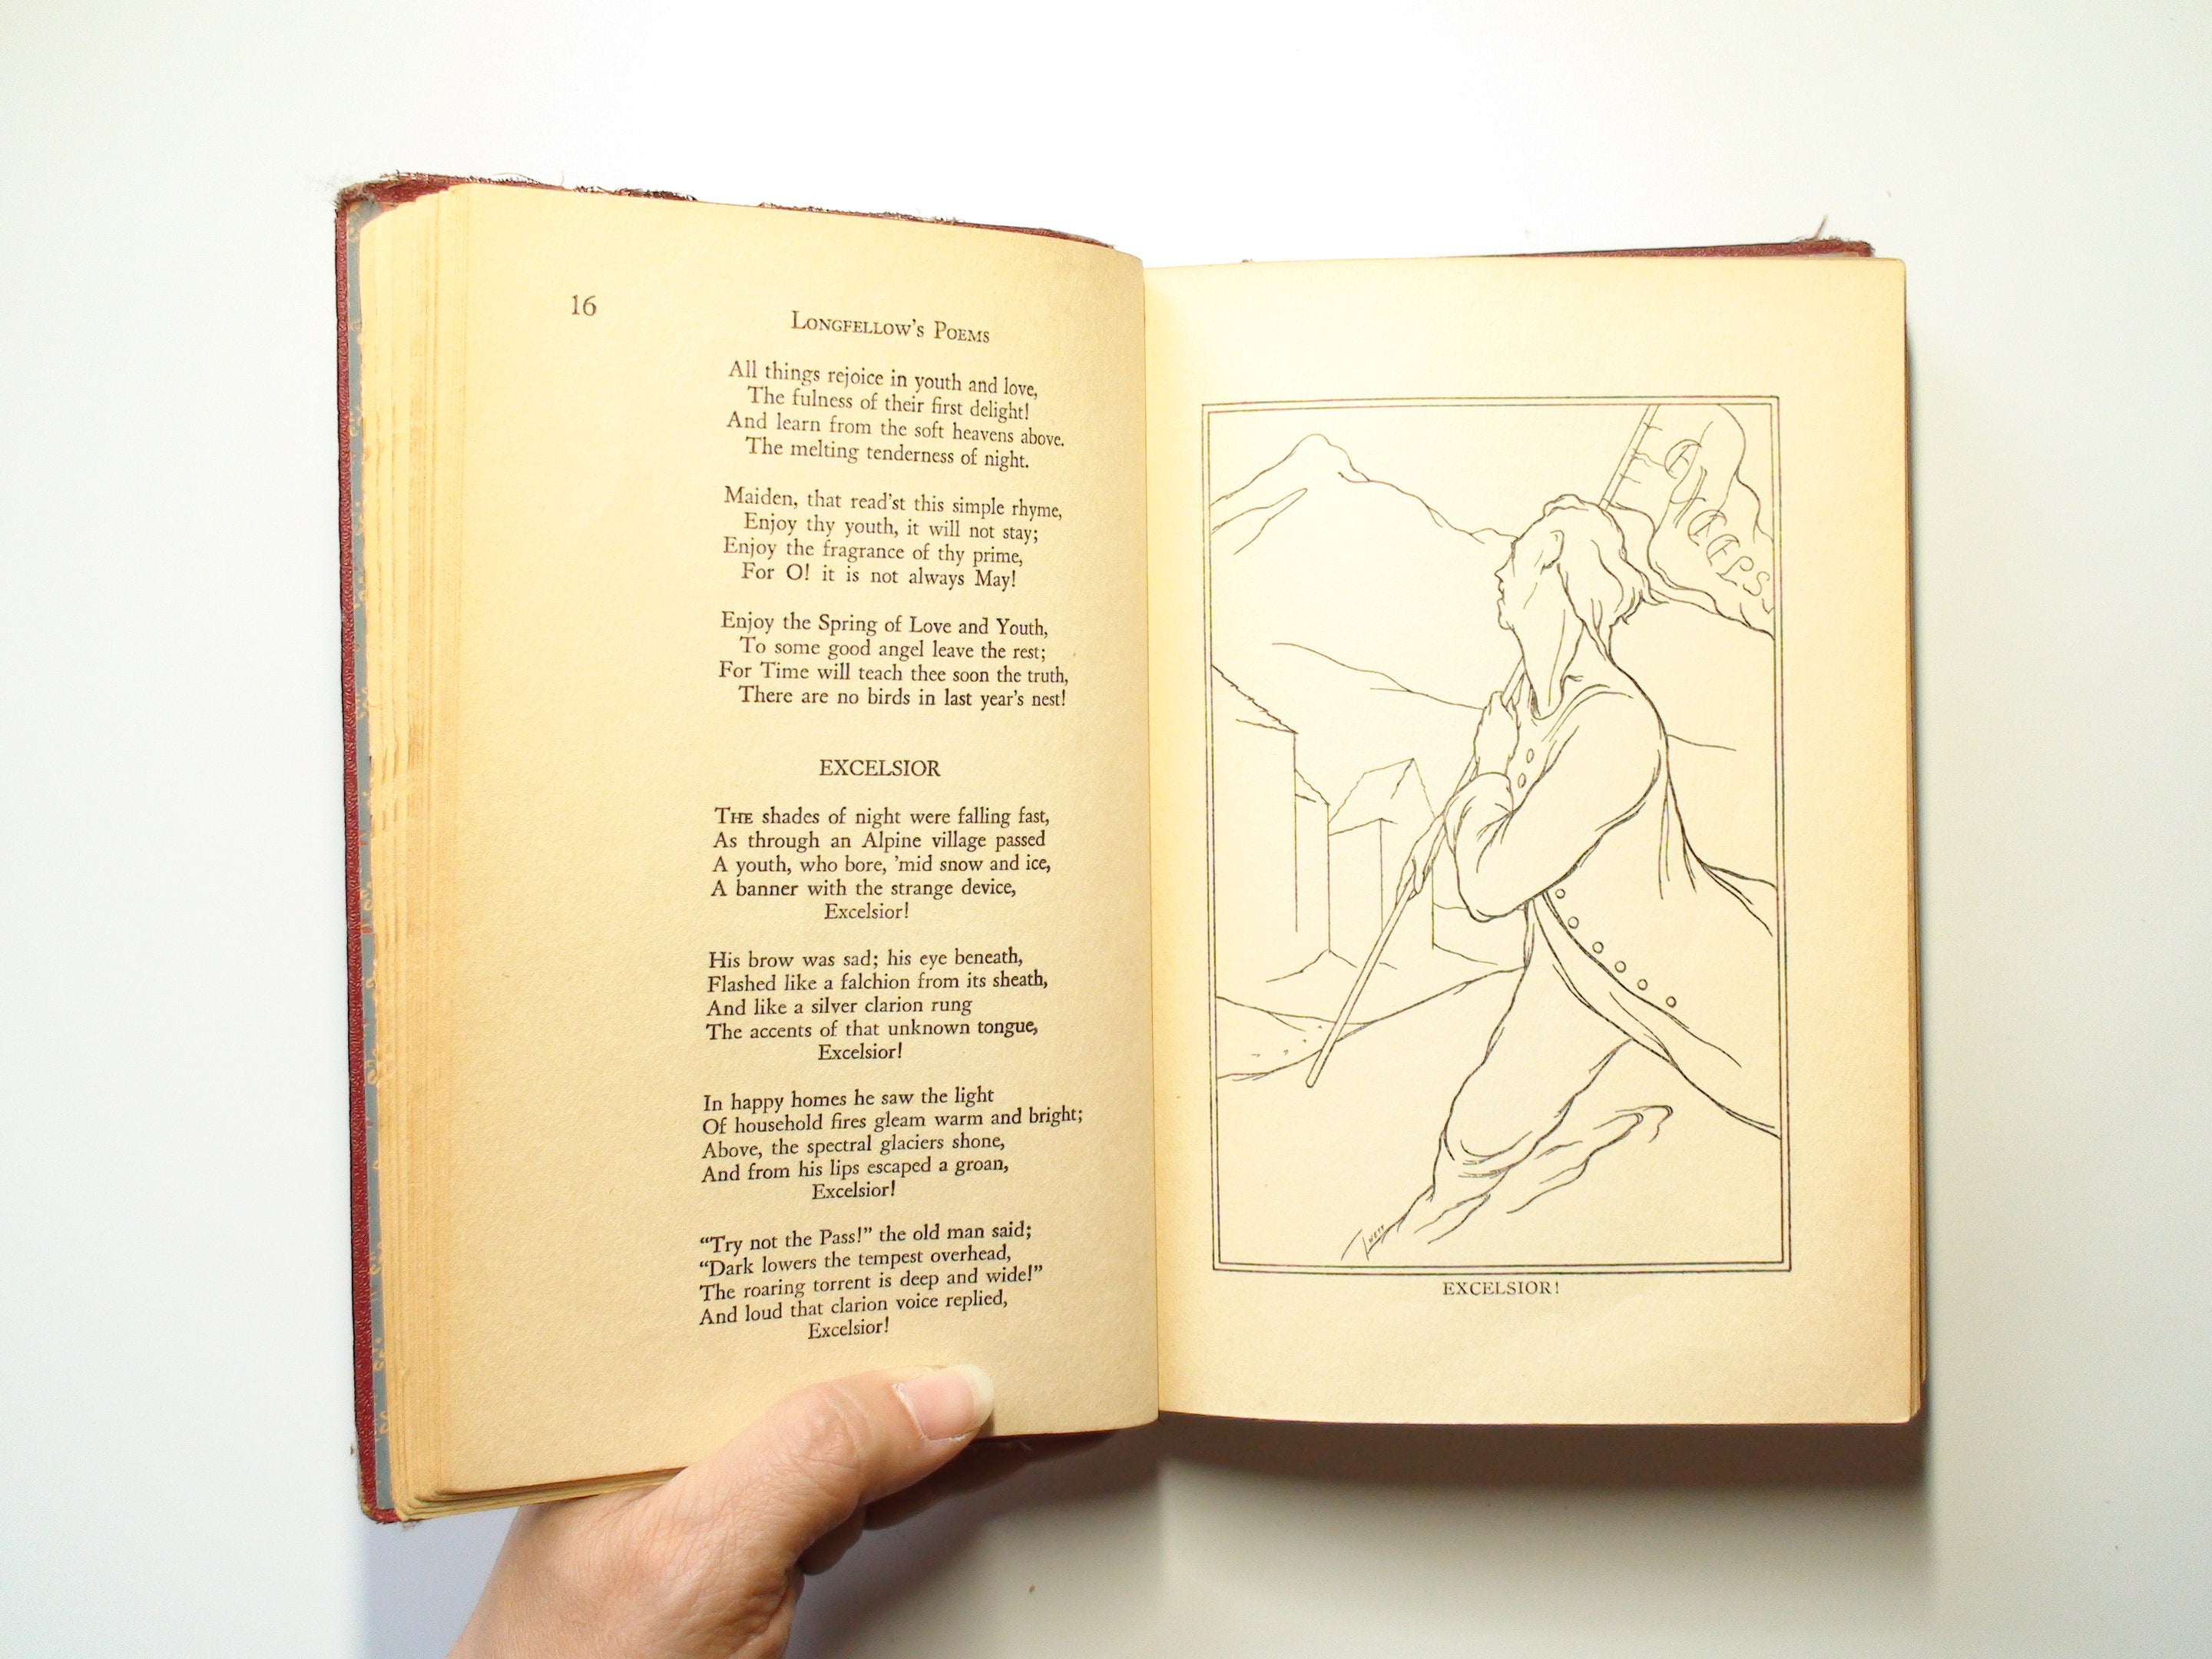 Best Loved Poems, Henry Wadsworth Longfellow, Spencer Press, Illustrated, 1937